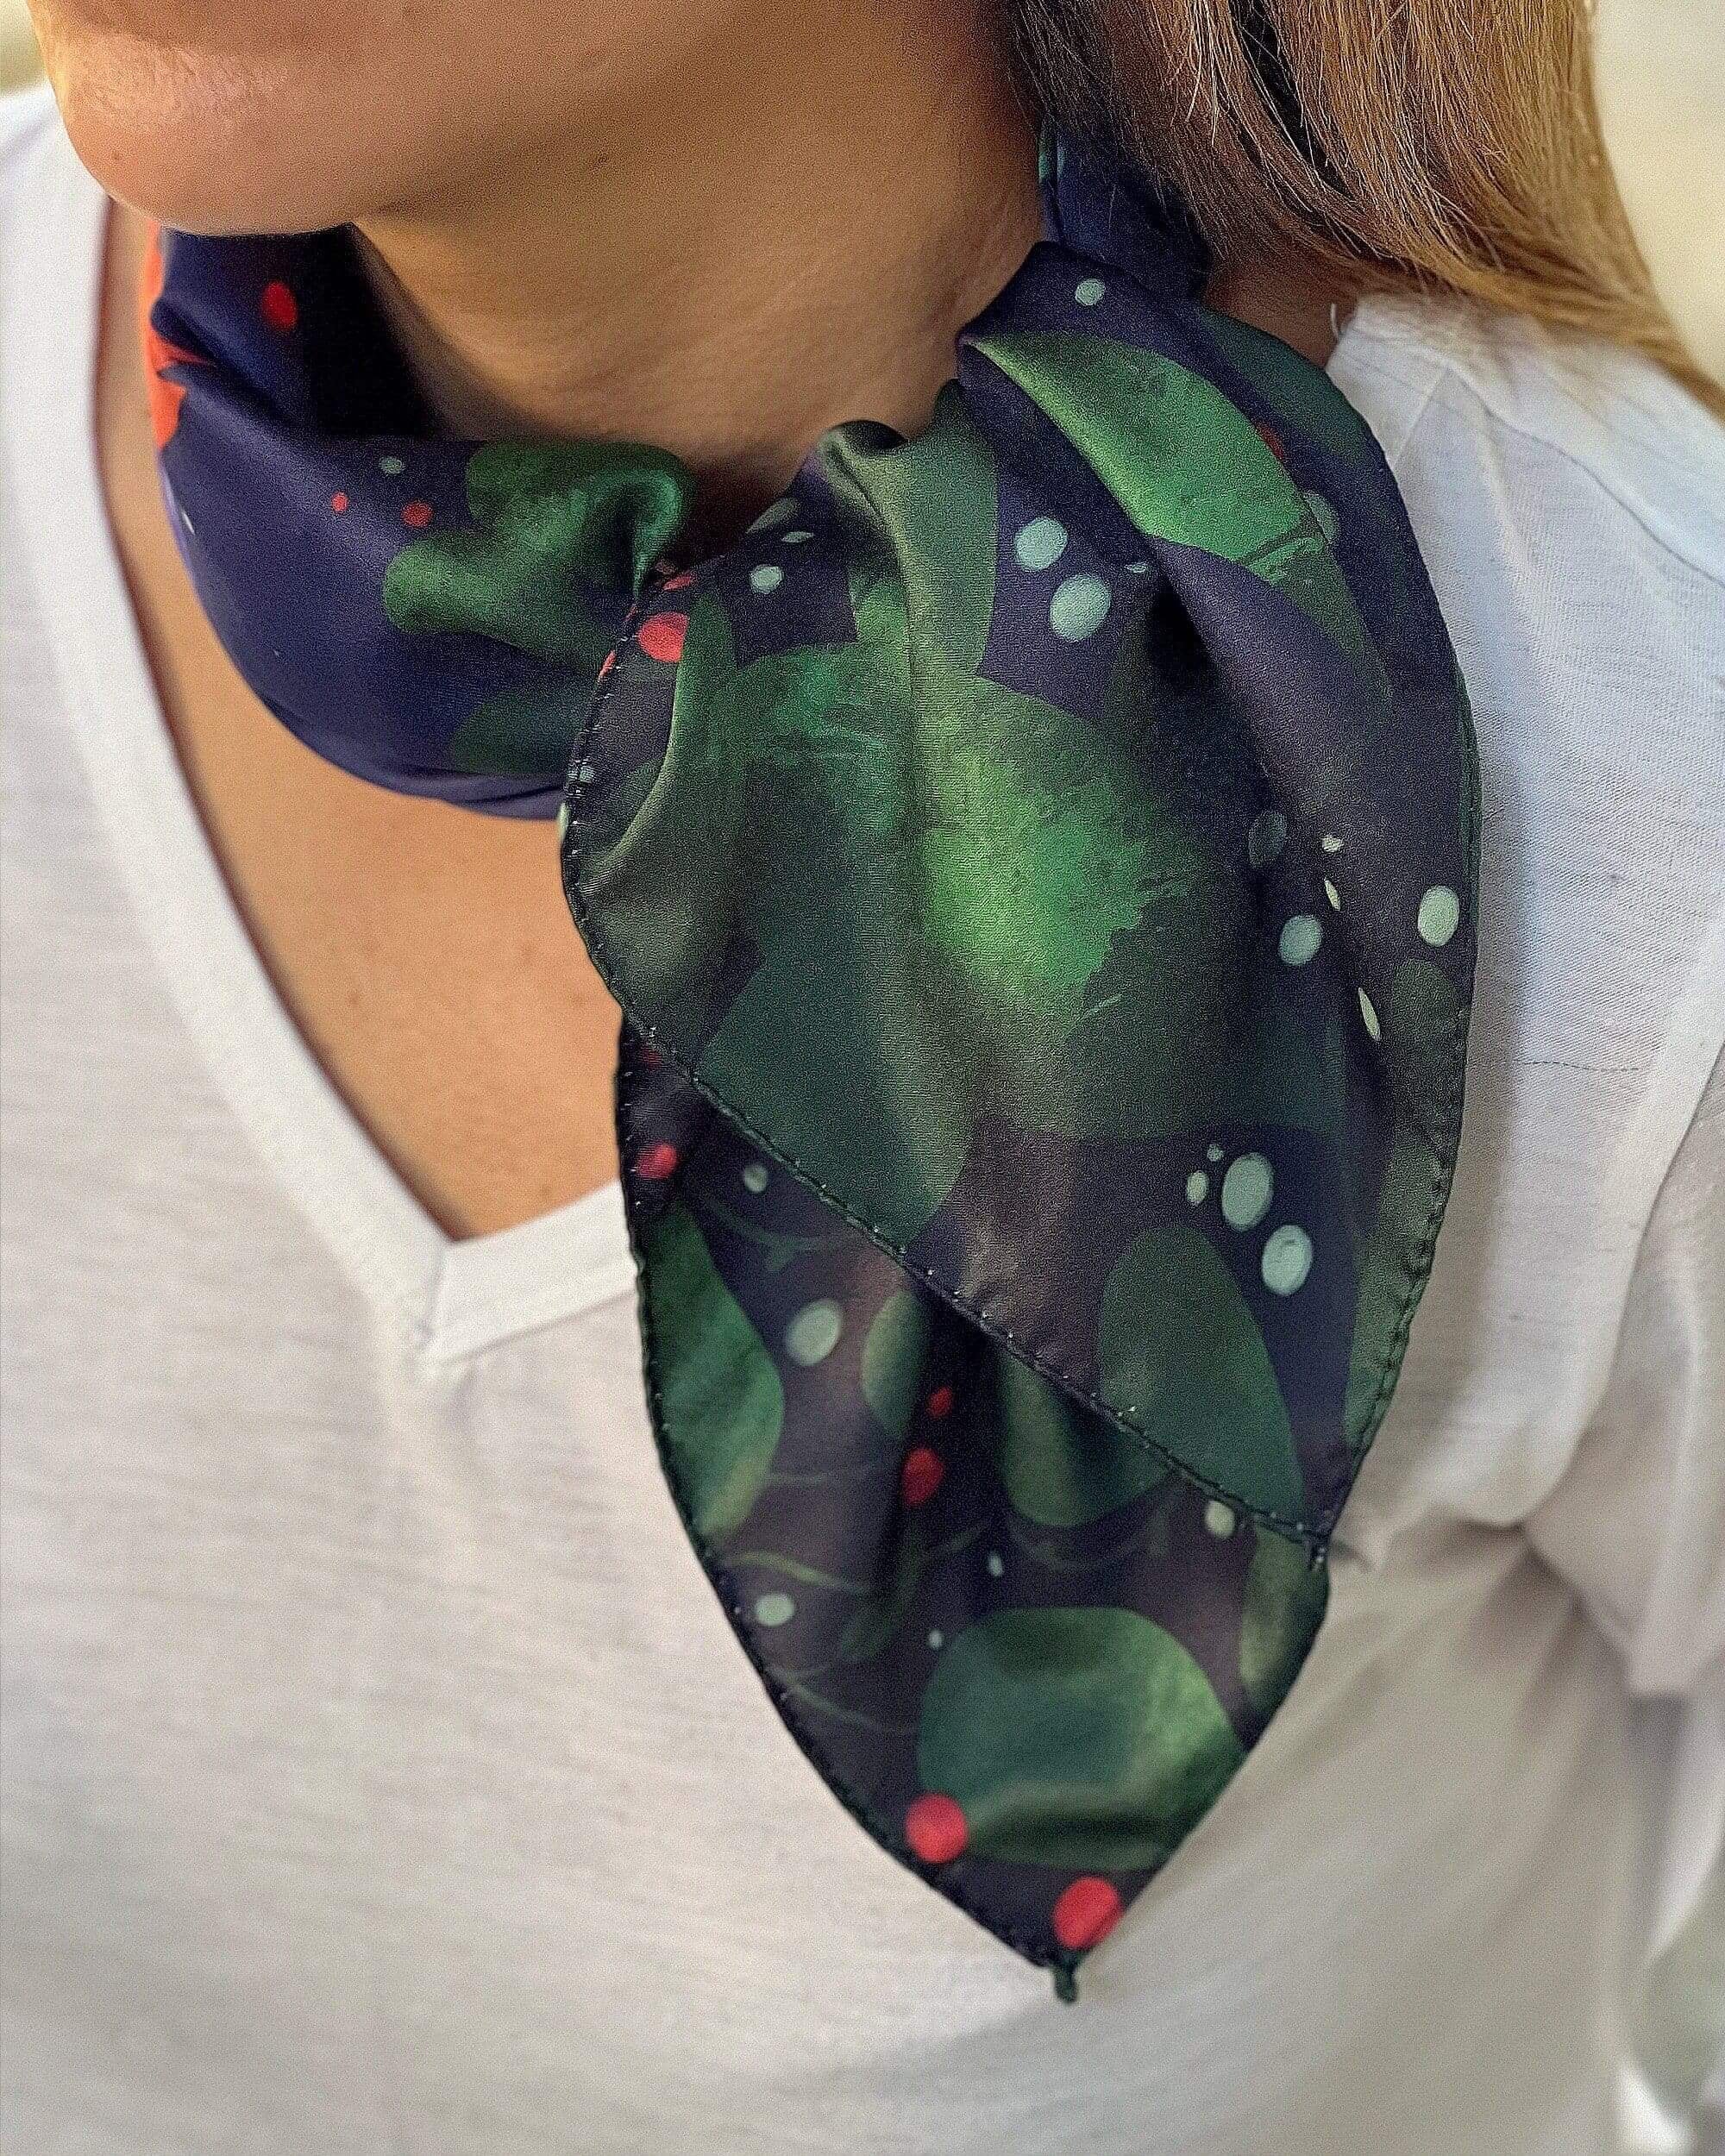 Make sure you have this special design neck scarf on hand when the weather turns cold. The scarf features a beautiful bird pattern that will make you look fashionable and stylish all season long!